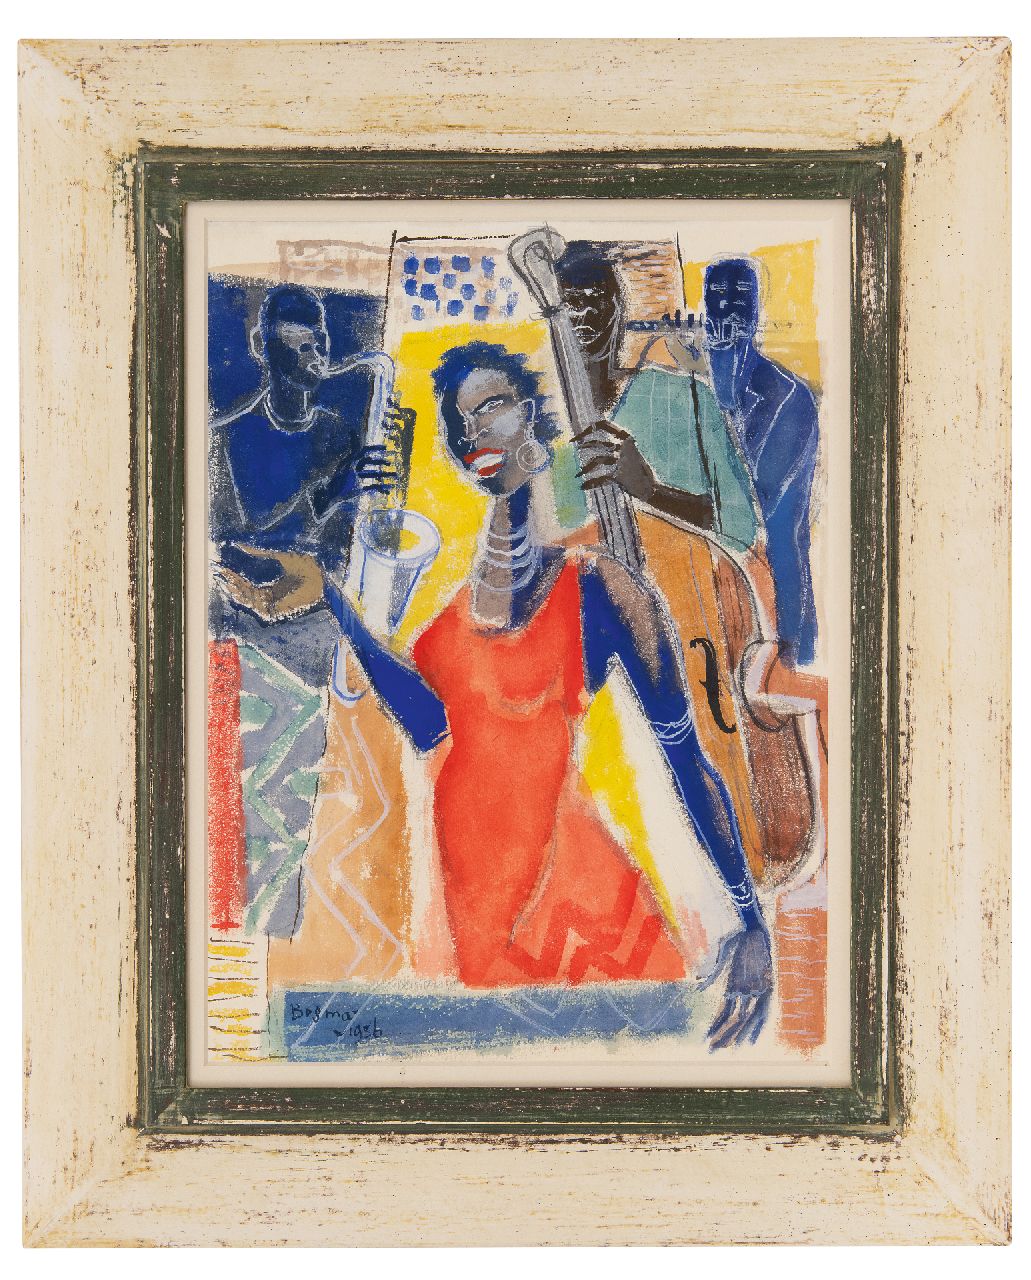 Bosma W.  | Willem 'Wim' Bosma | Watercolours and drawings offered for sale | Sarah Vaughan and band, gouache on paper 39.0 x 29.0 cm, signed l.l. and dated 1956